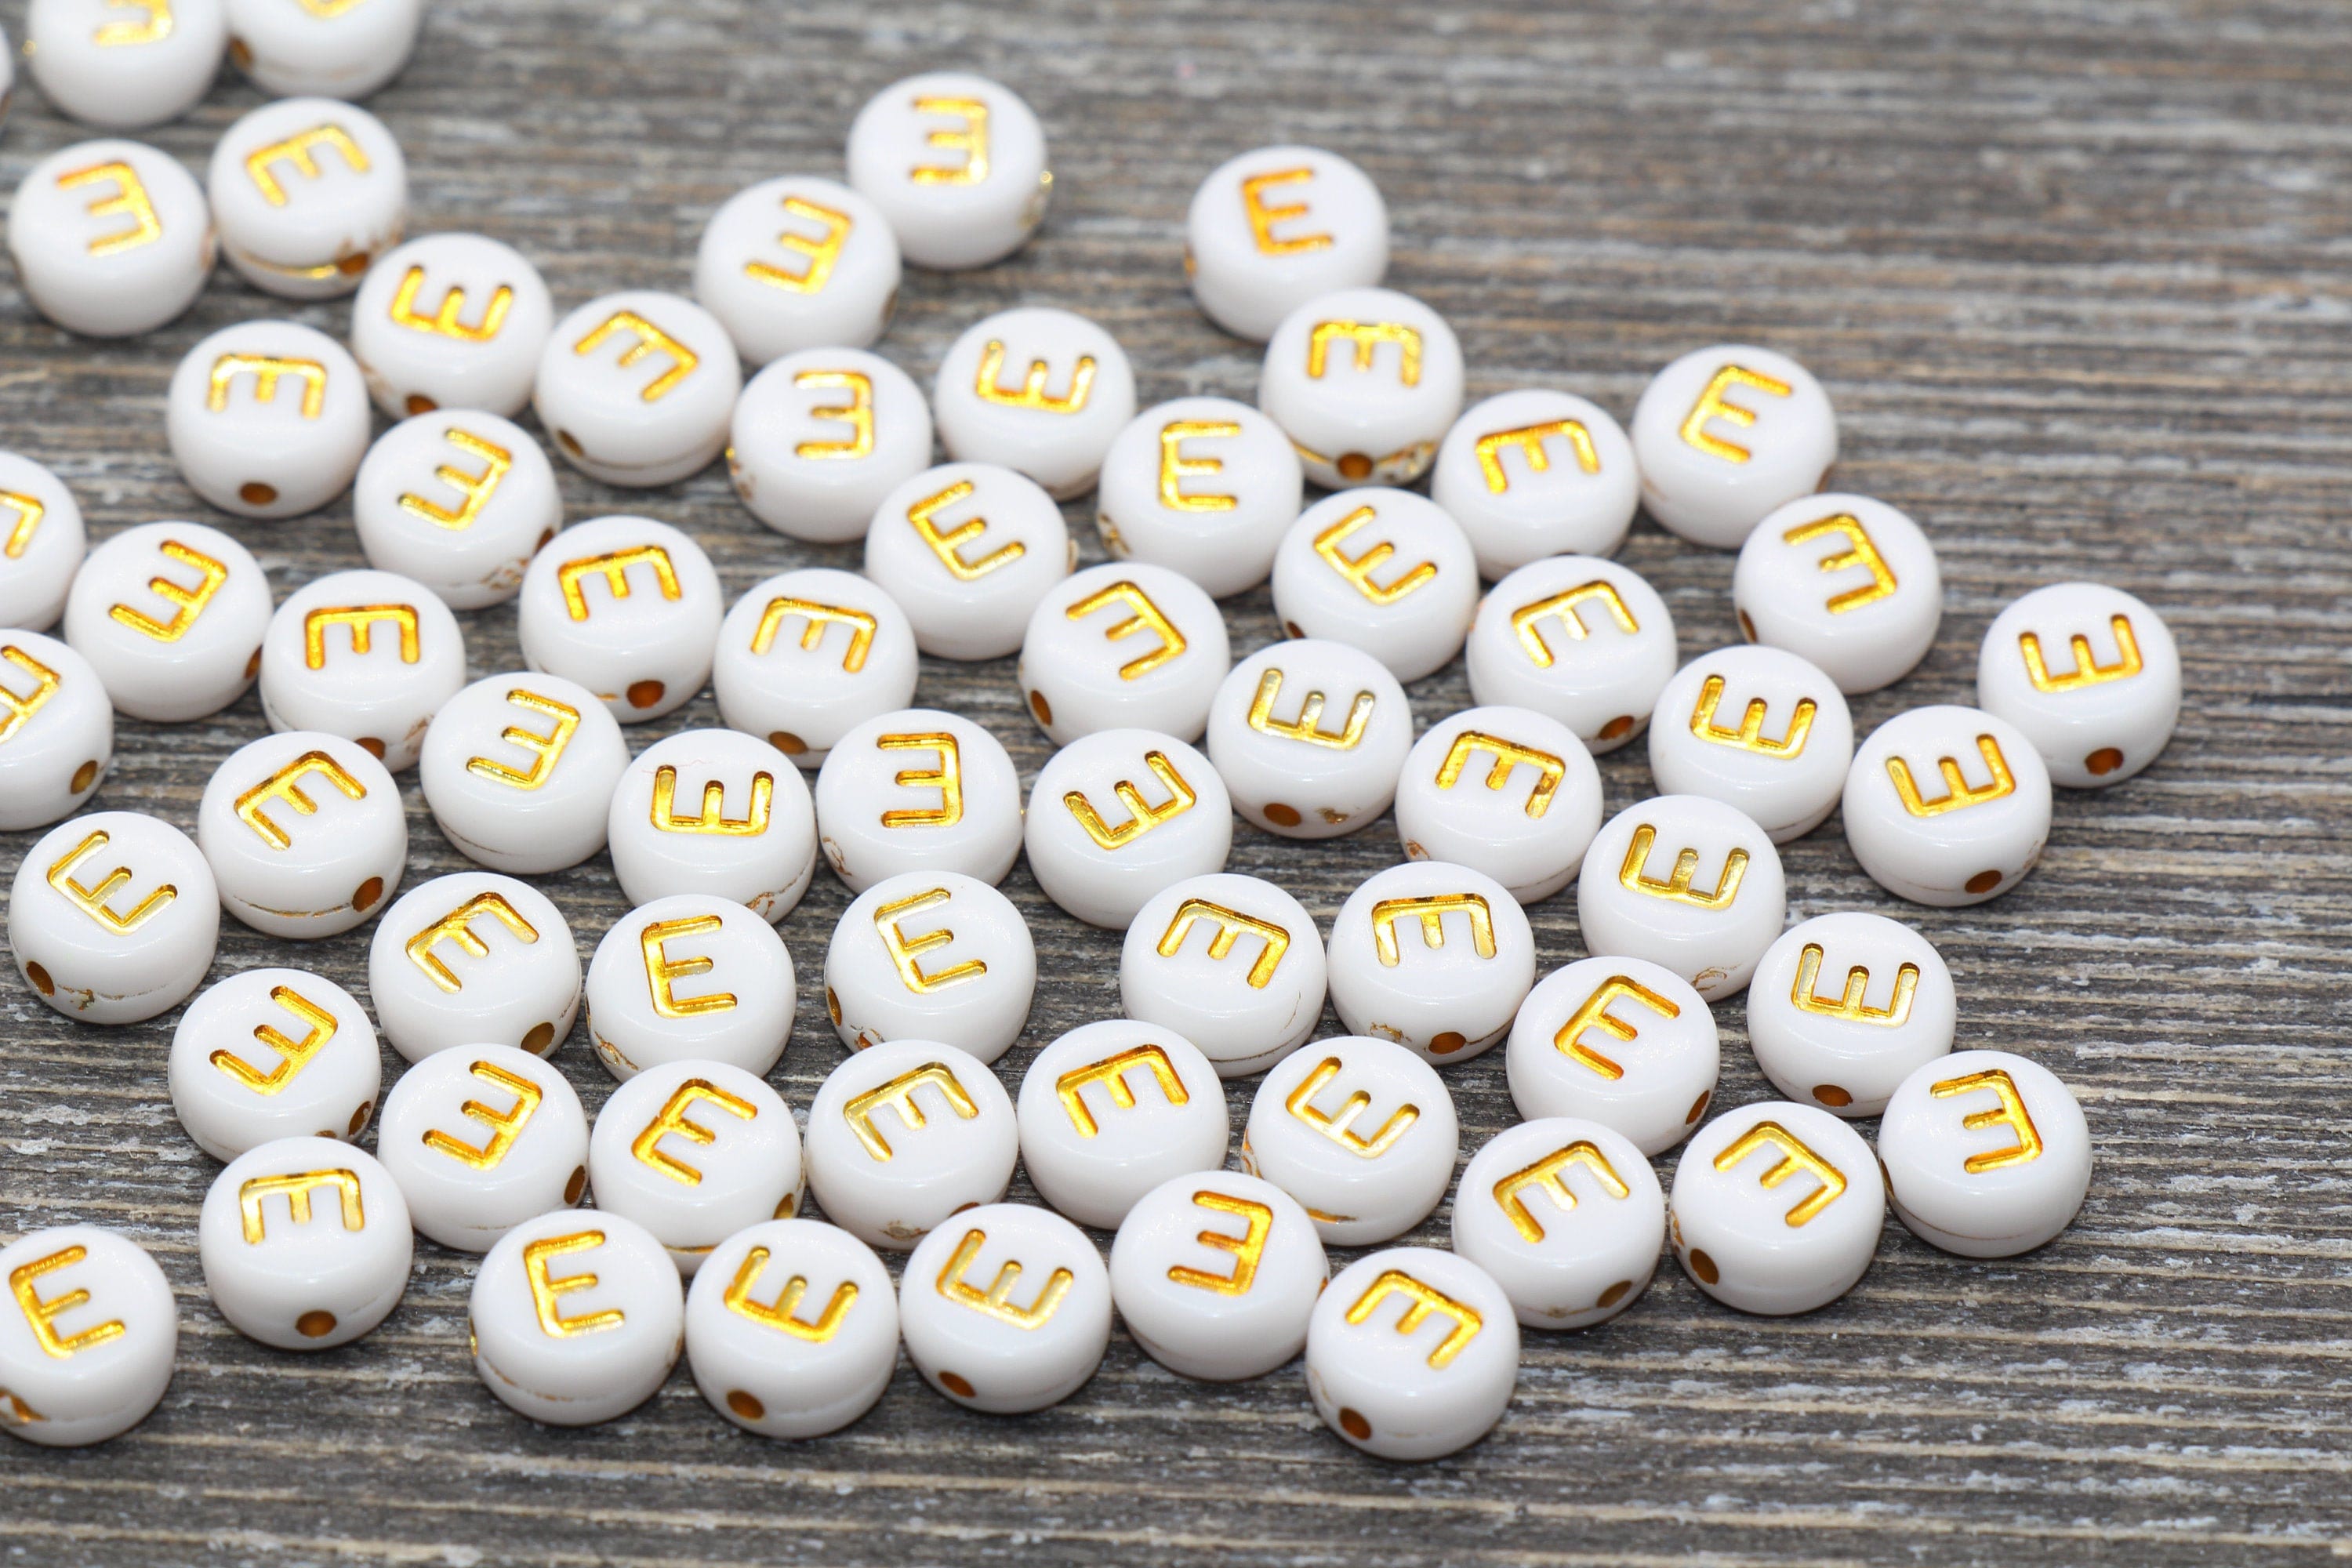 Letter Beads - 7mm Little Round White Alphabet Acrylic or Resin Beads - 400  pc set